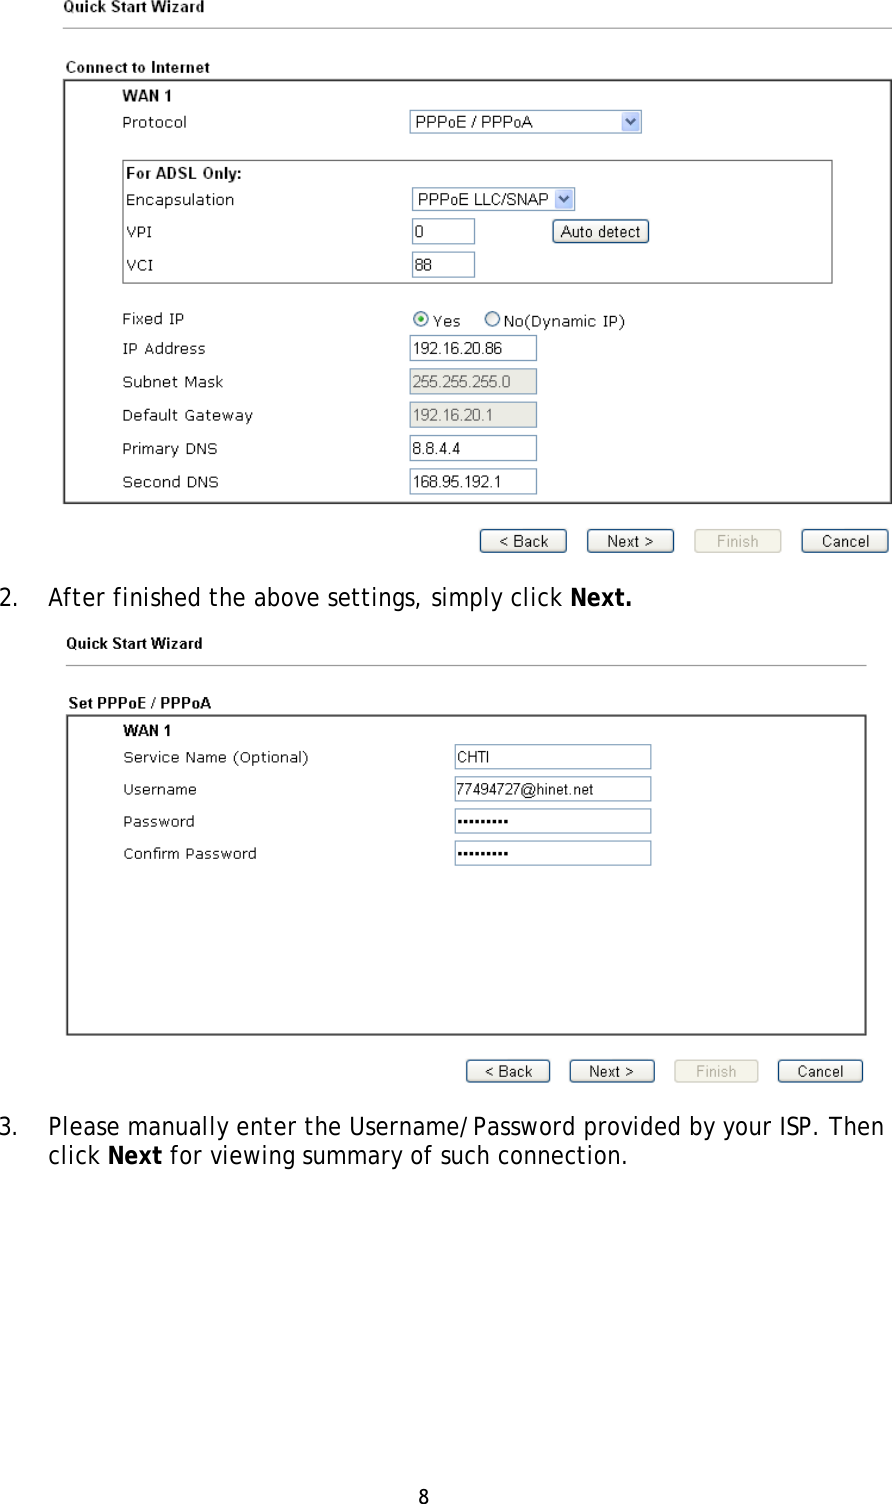 8 2. After finished the above settings, simply click Next.3. Please manually enter the Username/Password provided by your ISP. Thenclick Next for viewing summary of such connection.